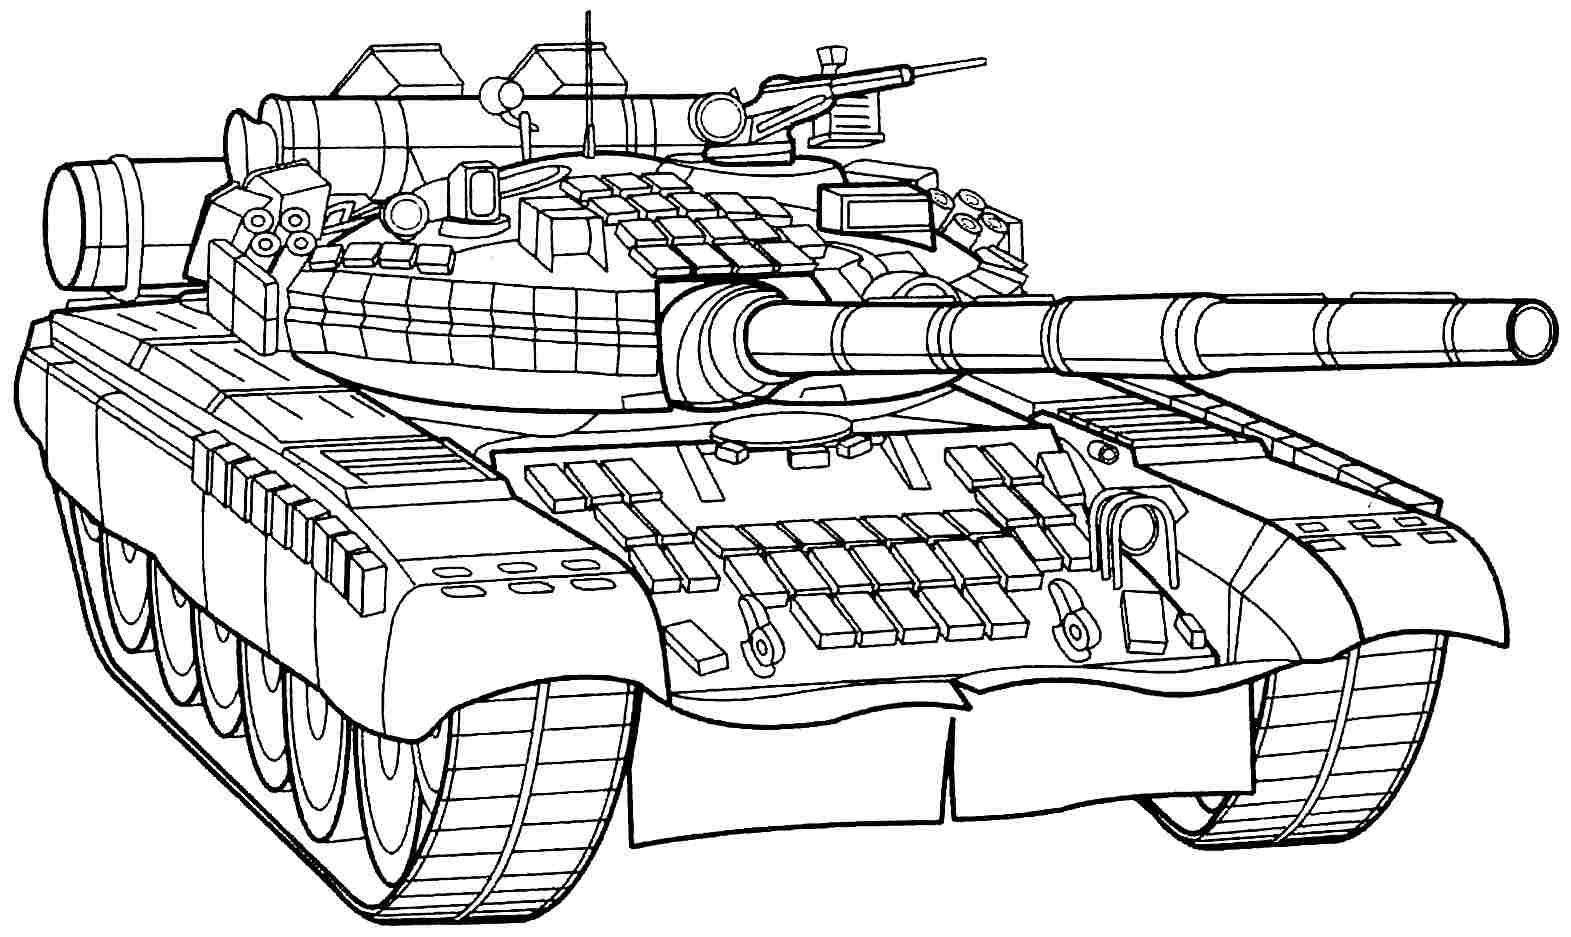 7 Pics of Army Cars Coloring Pages - Army Air Force Coloring Pages ...